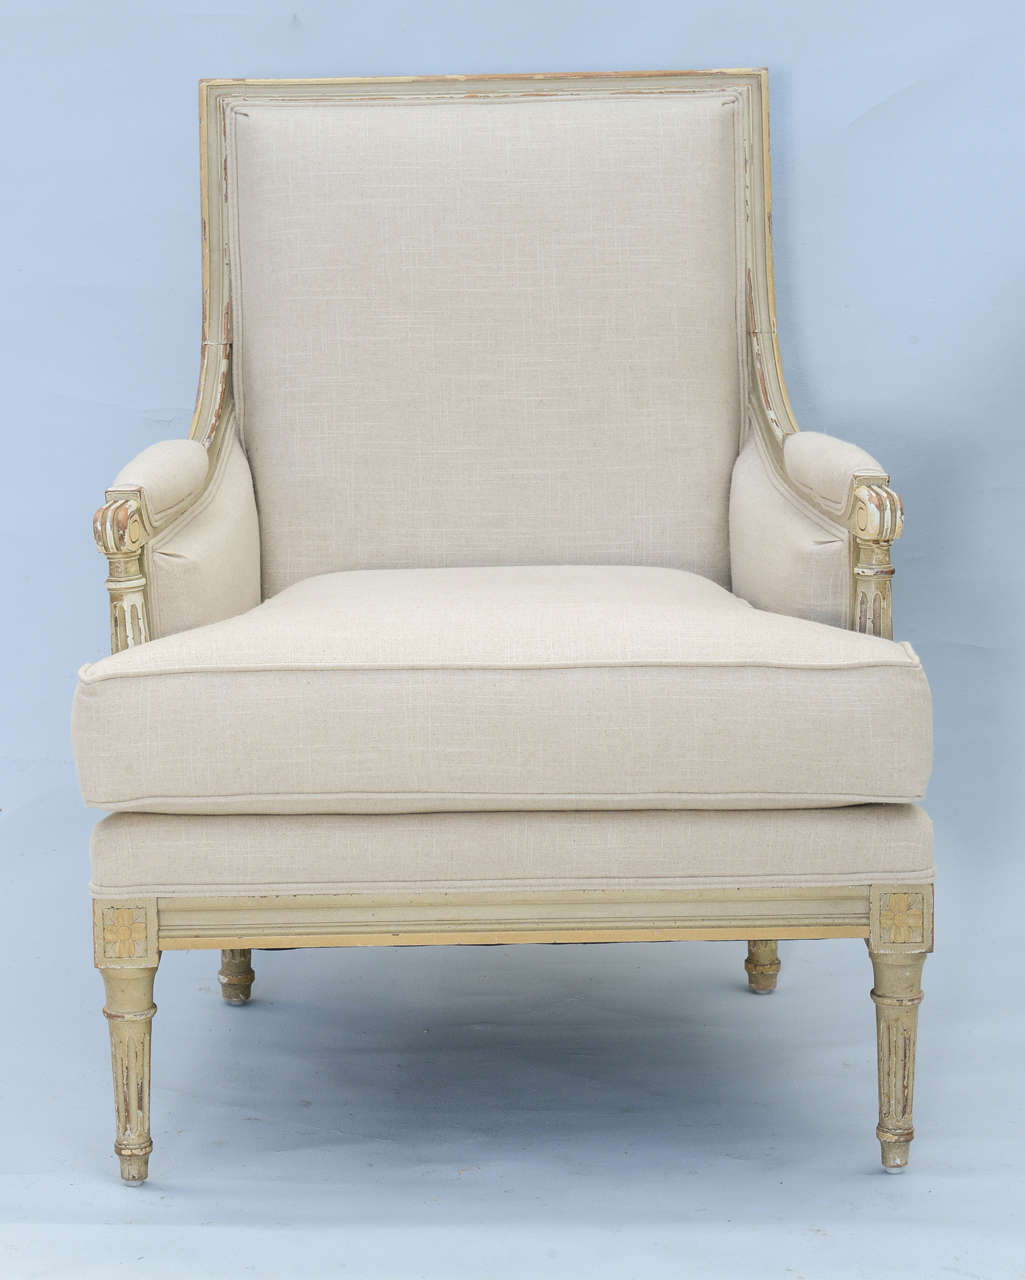 Pair of bergeres, distressed painted finish, each having upholstered square back, outswept arms with padded armrest, raised on round fluted legs; upholstered in linen fabric.